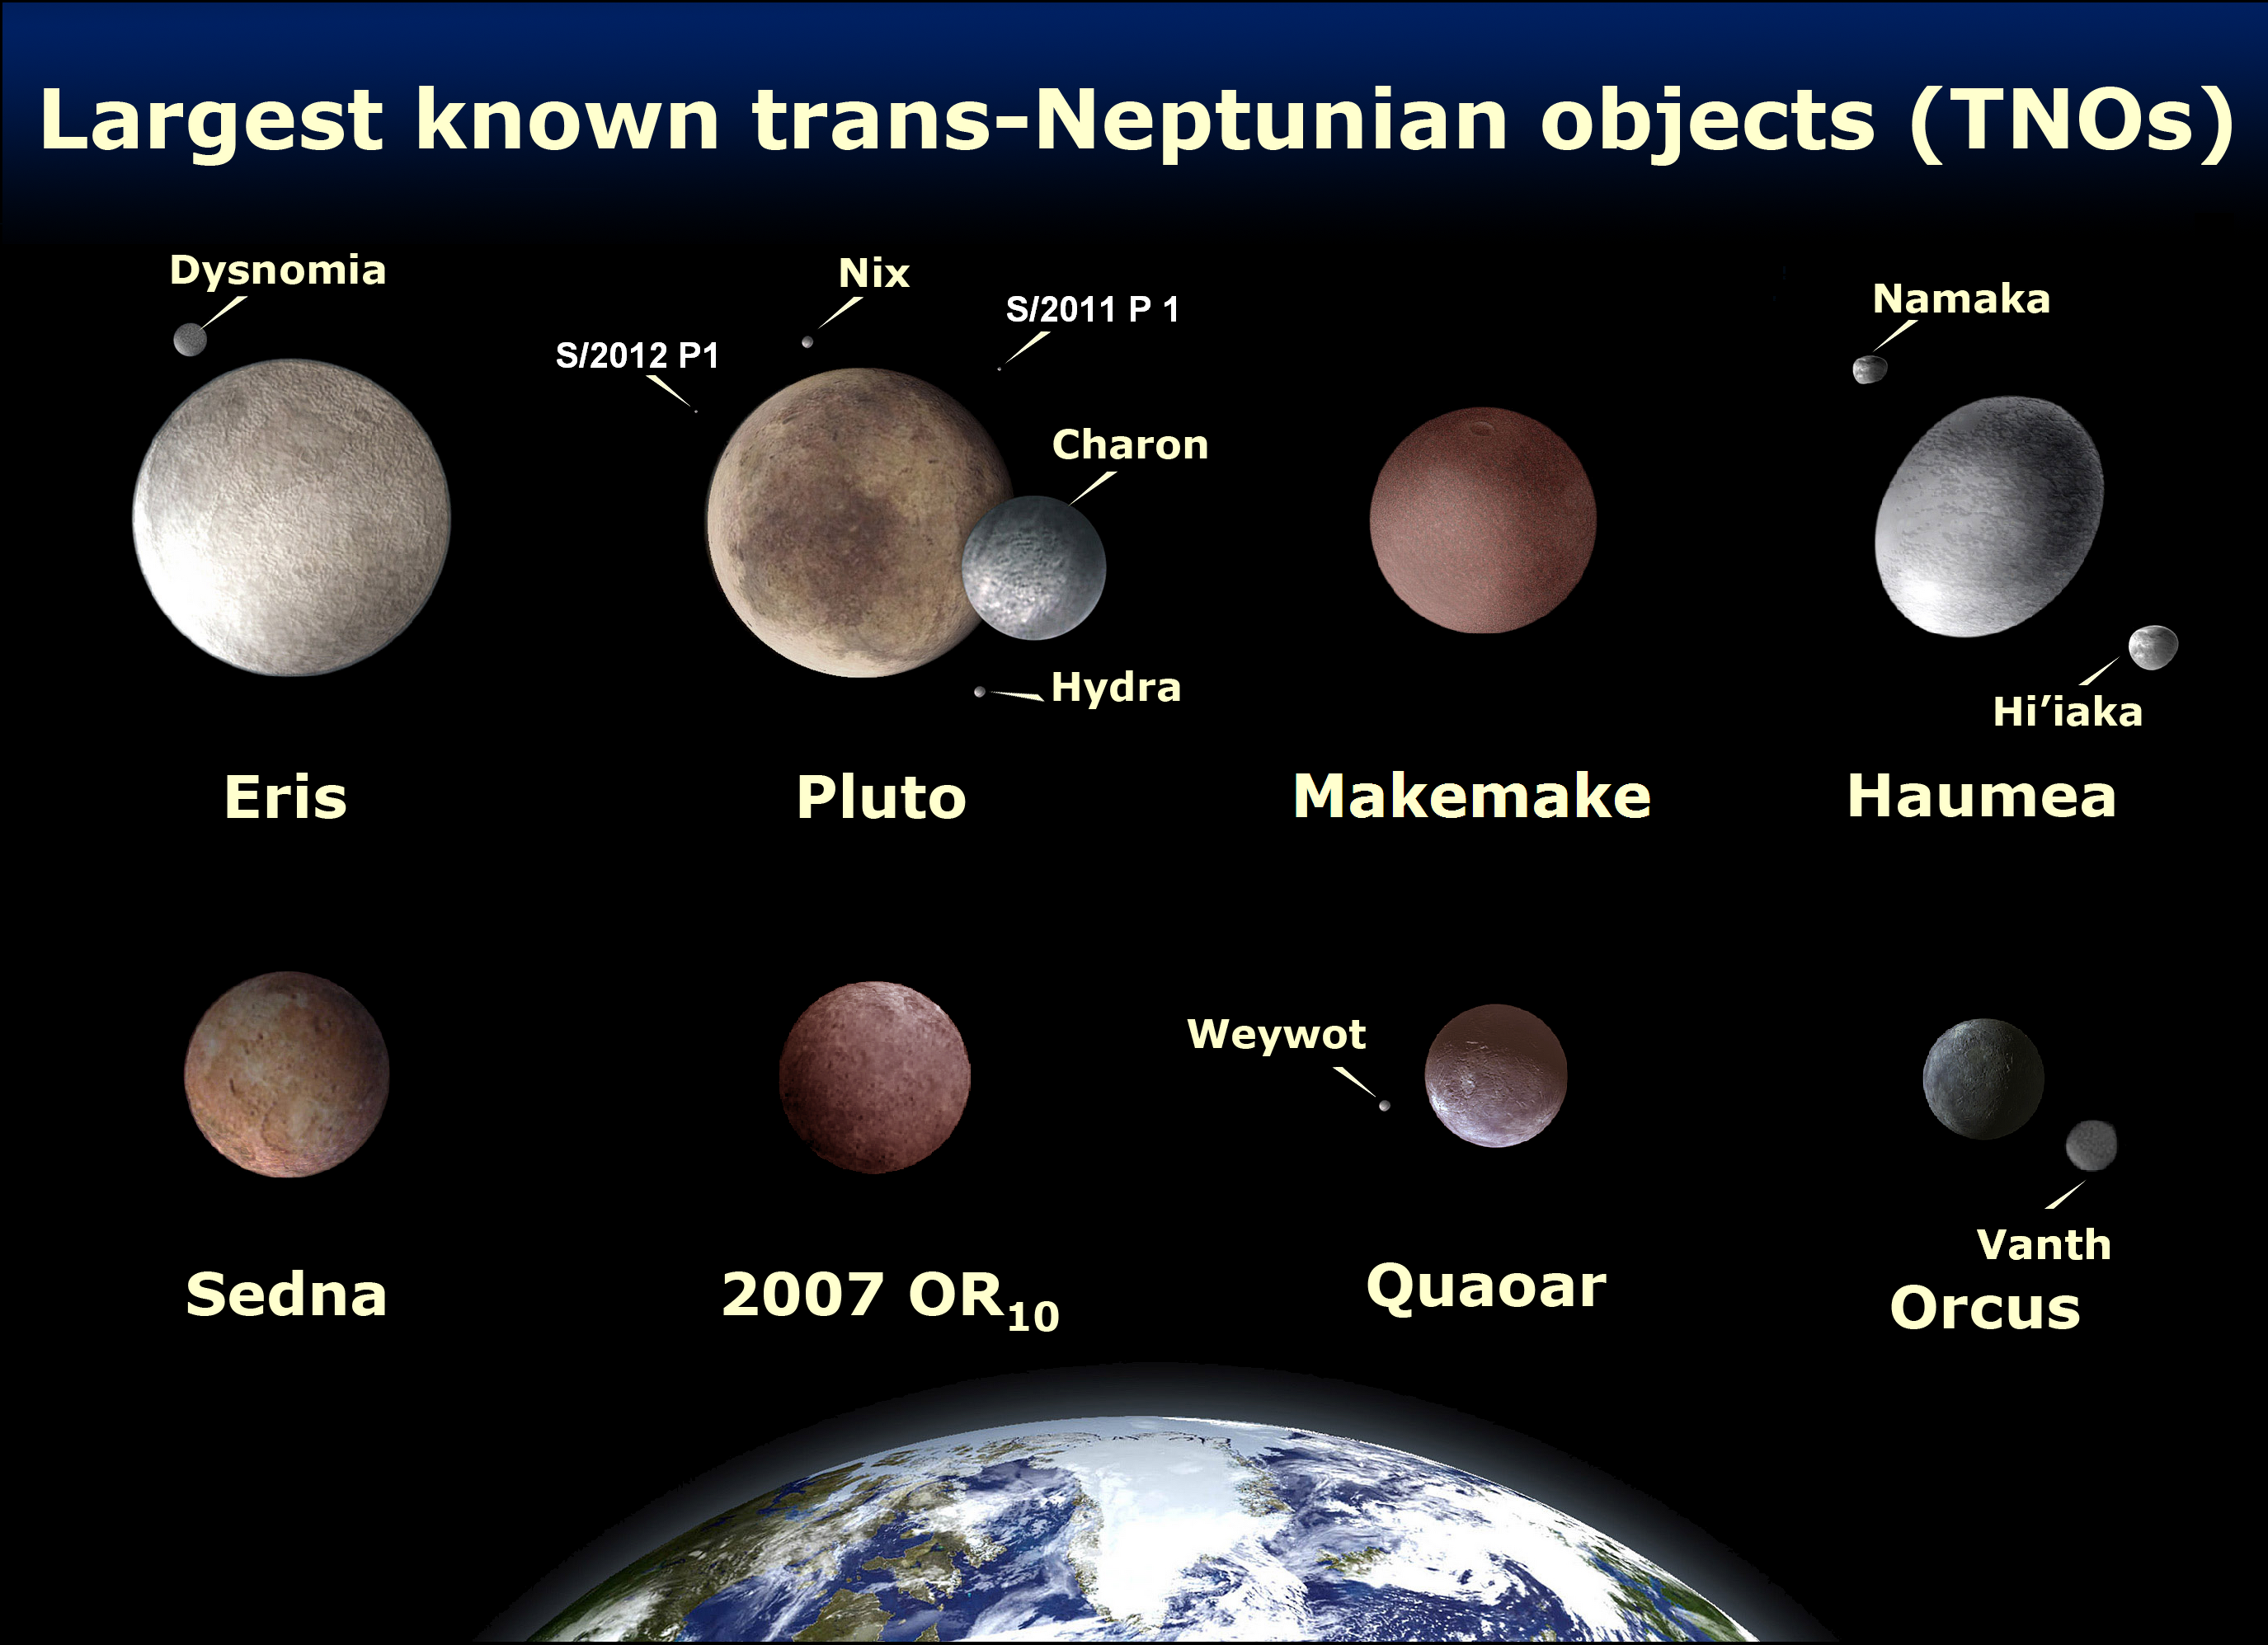 our solar system planets in order with no pluto